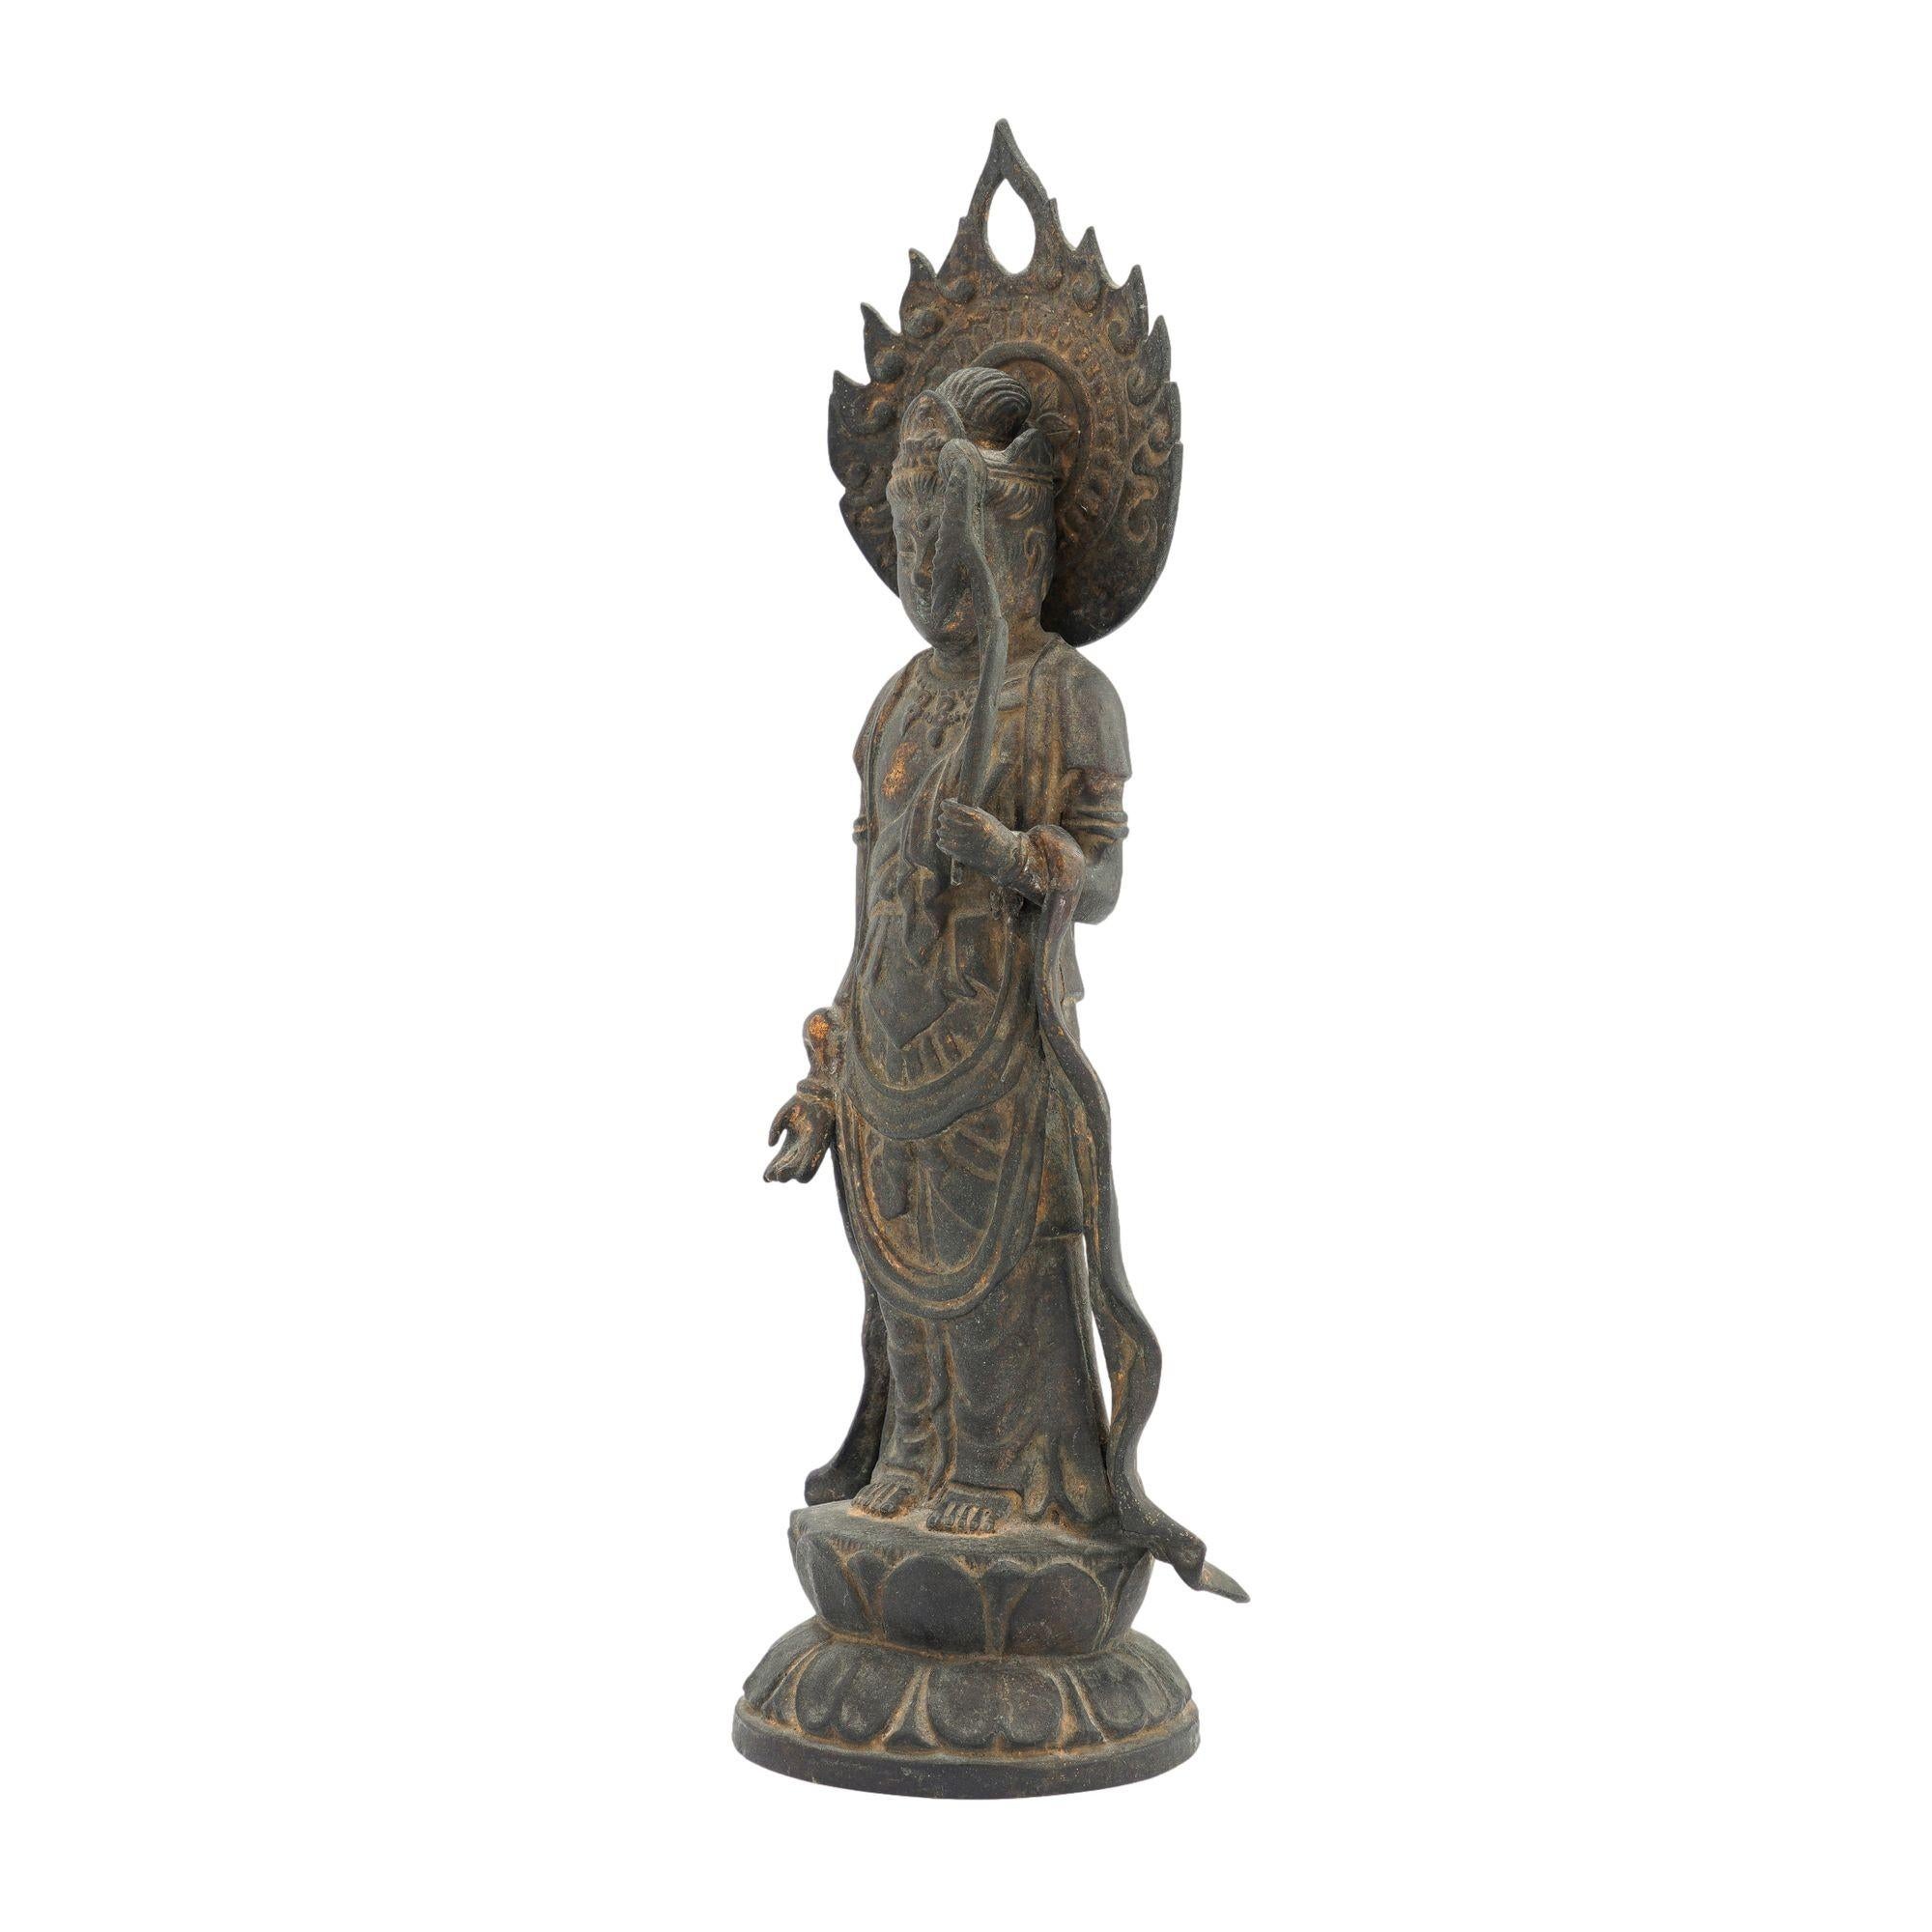 Cast bronze statue of a half draped figure of the standing Bodhisattva on a lotus plinth, with a removable flaming nimbus surrounding the head. The figure holds a lotus, the symbol of purity and worldly detachment, in their raised left hand, with